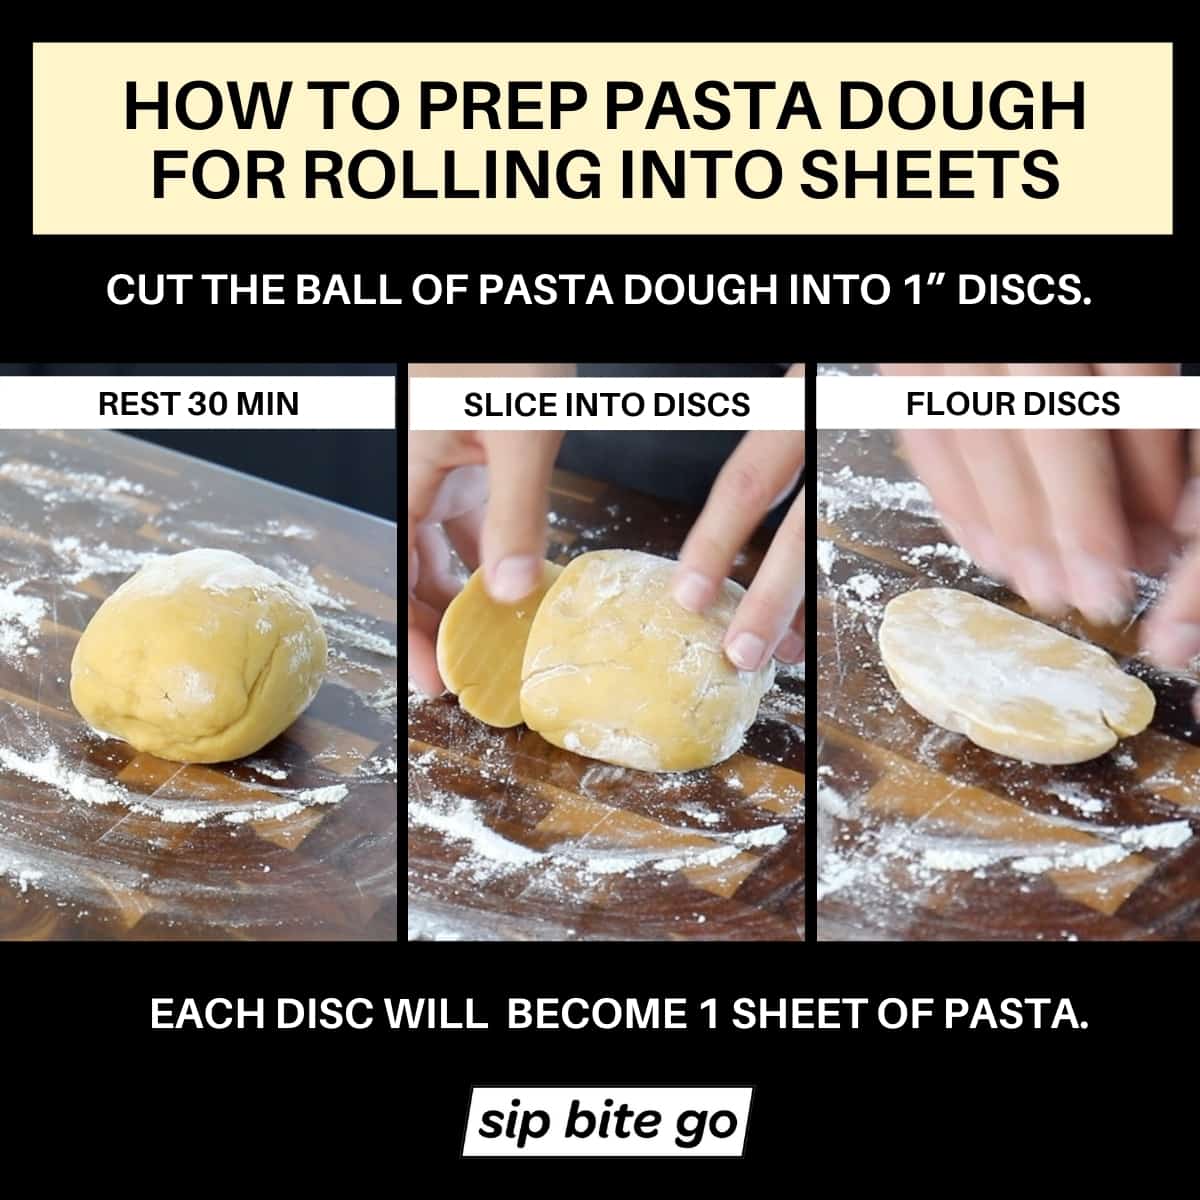 https://sipbitego.com/wp-content/uploads/2021/05/Demonstrating-how-to-prepare-pasta-dough-for-rolling-into-pasta-sheets-with-step-by-step-graphic-chart-and-directions-Sip-Bite-Go.jpg